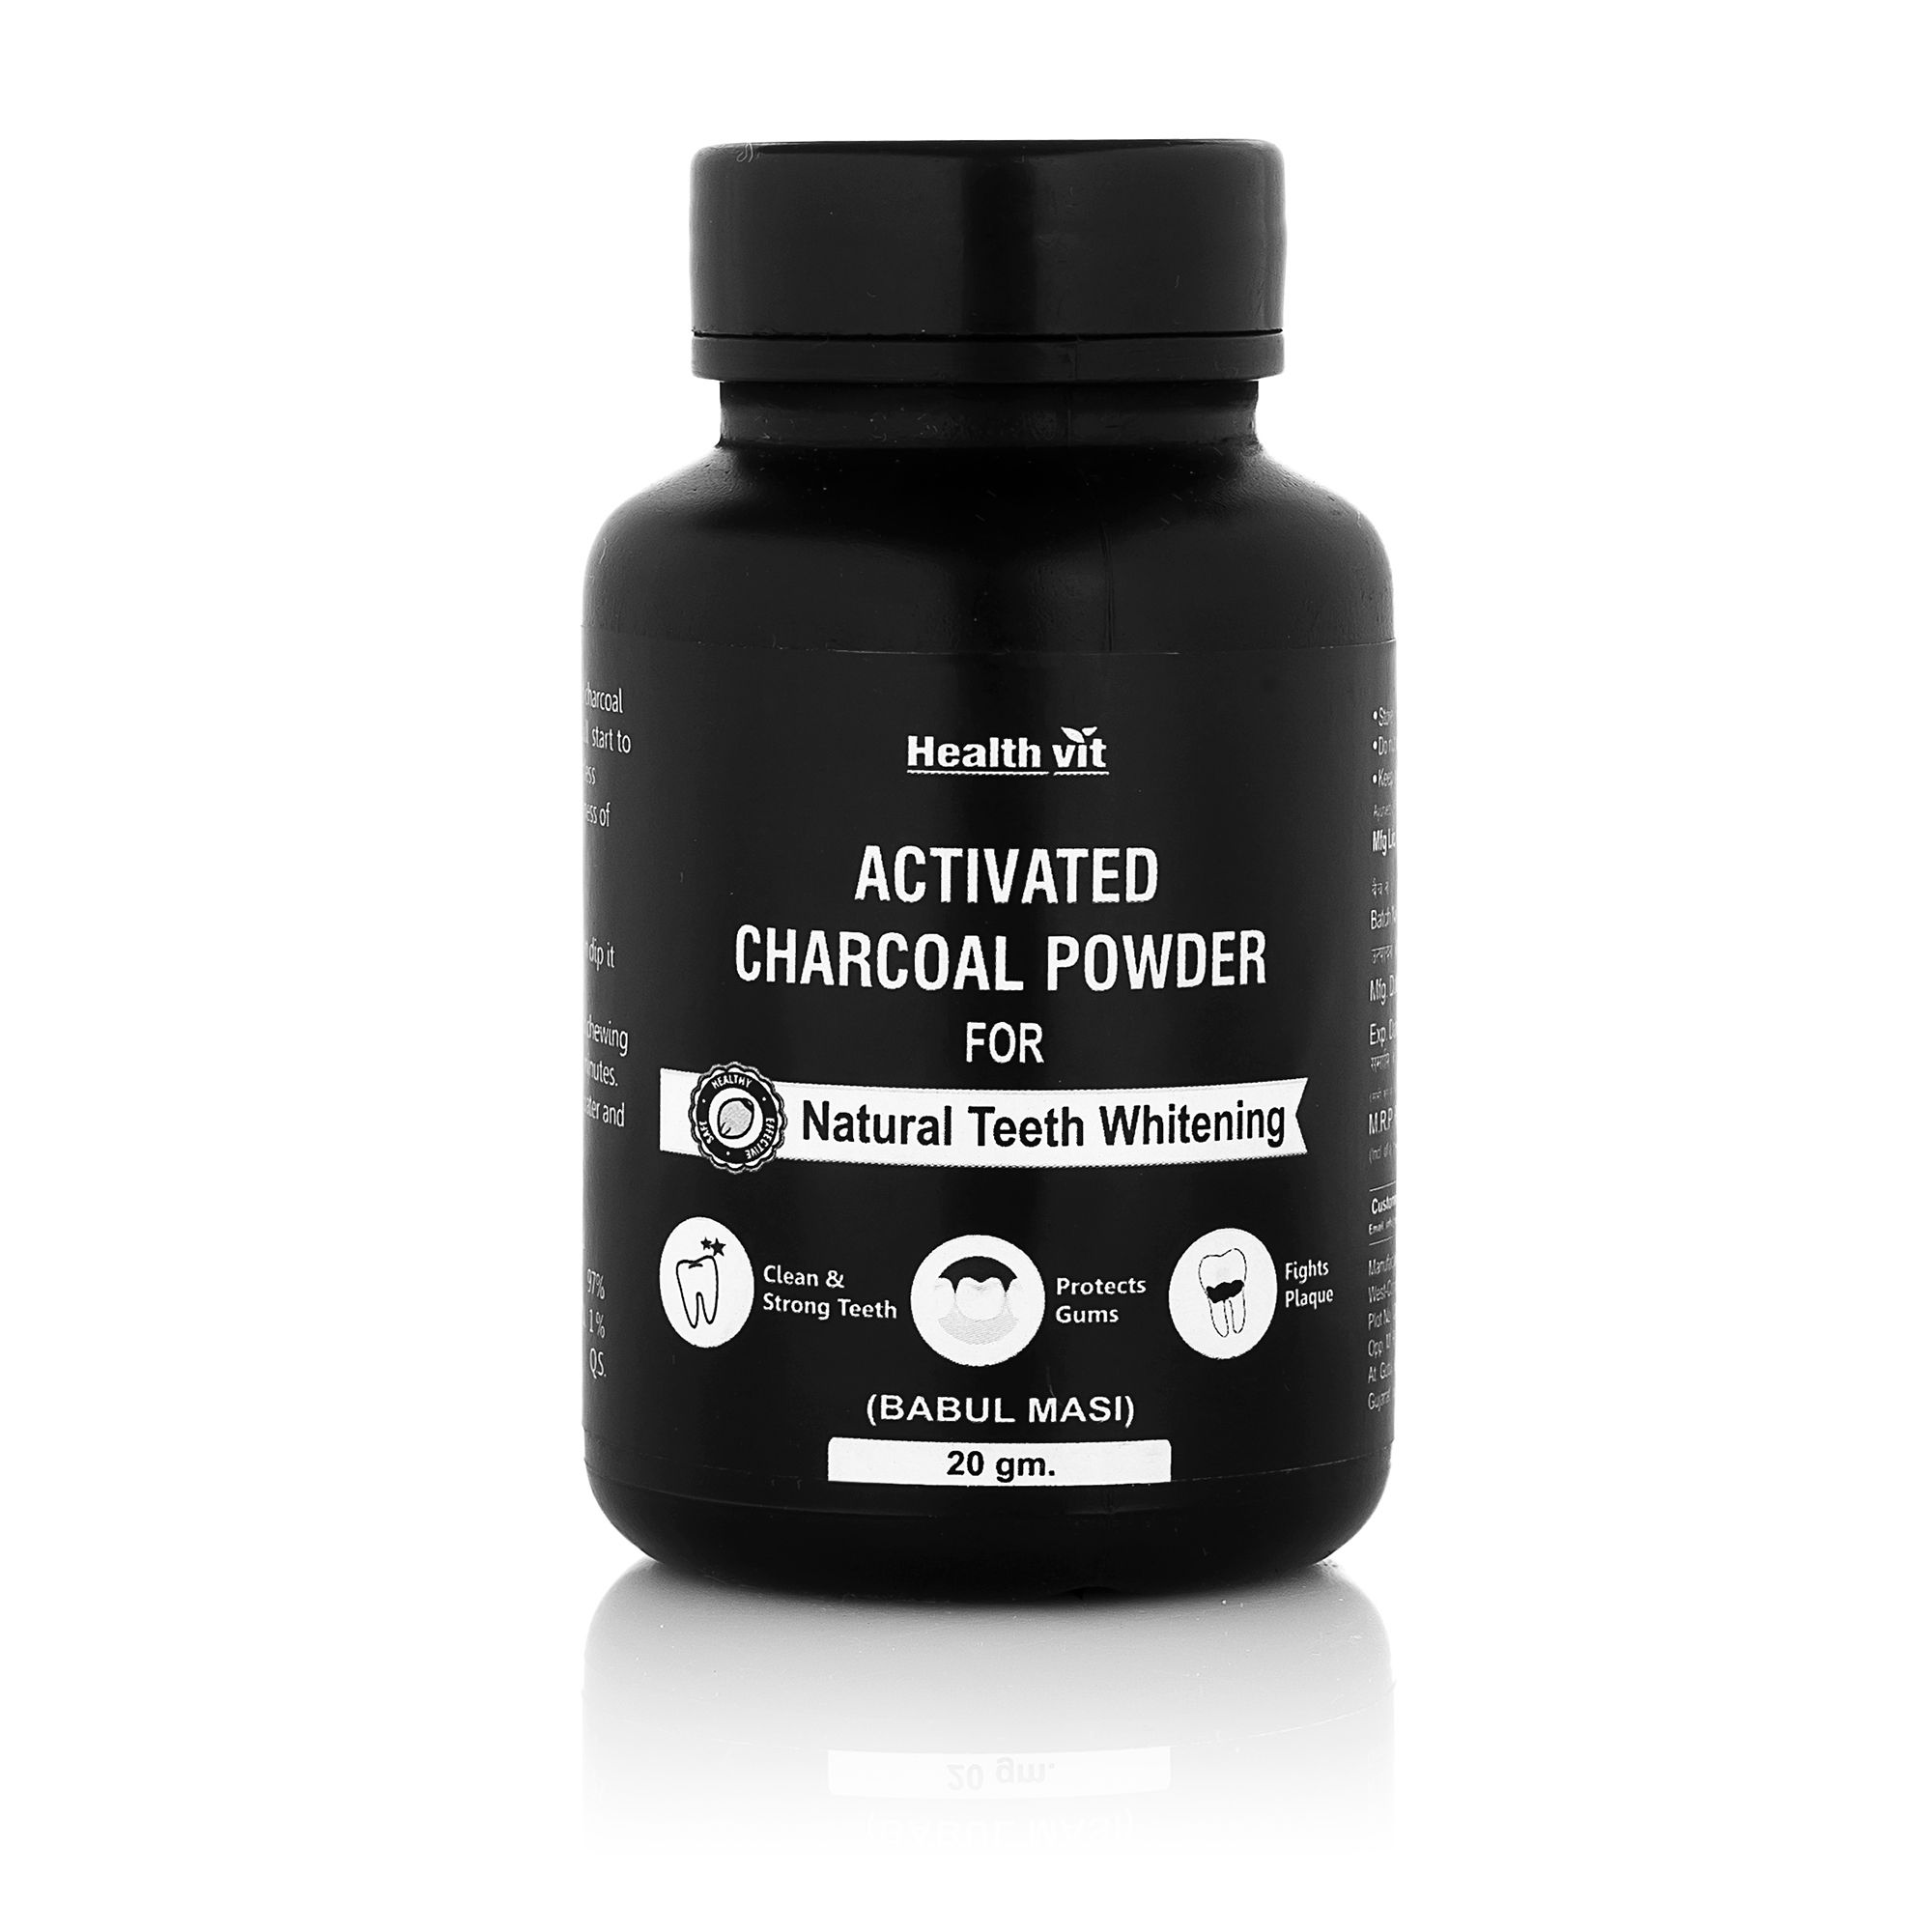 HealthVit Activated Charcoal Powder For Natural Teeth Whitening